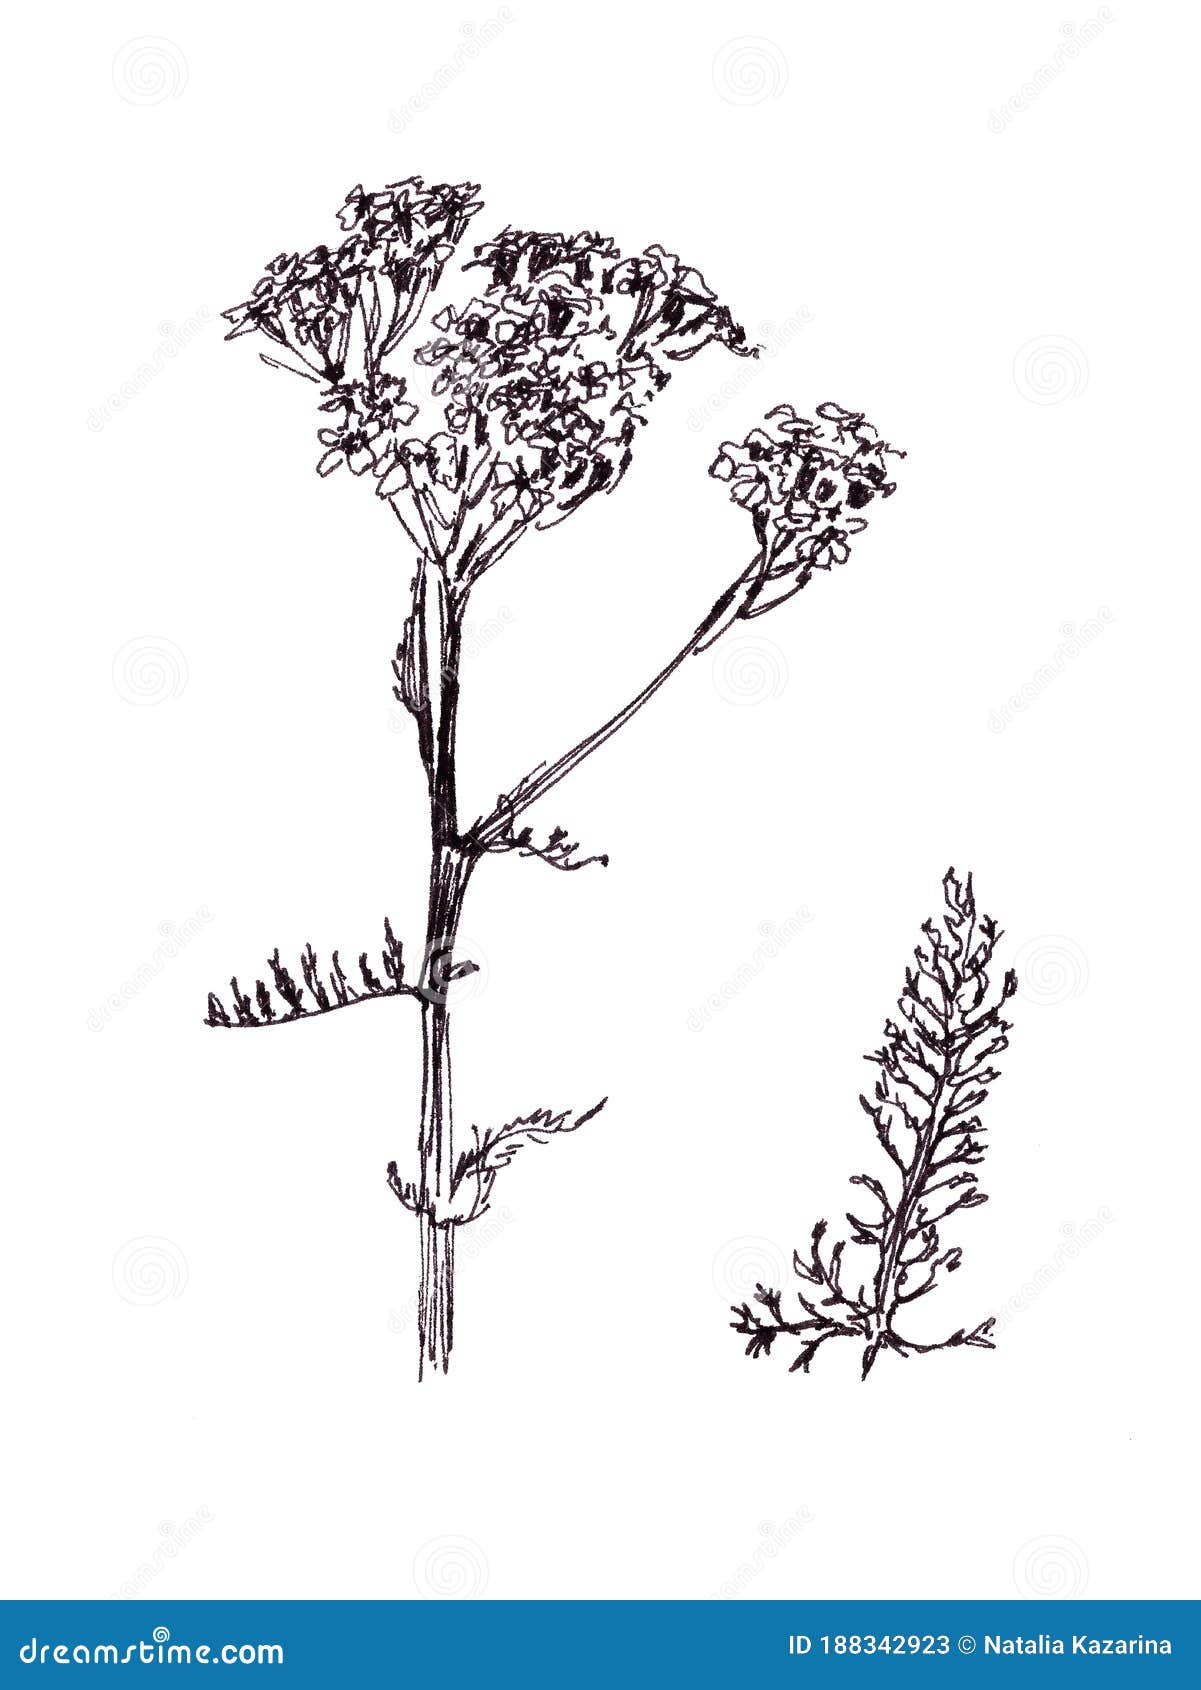 Yarrow, Milfoil, Graphic Black and White Drawing, Botanical Sketch ...